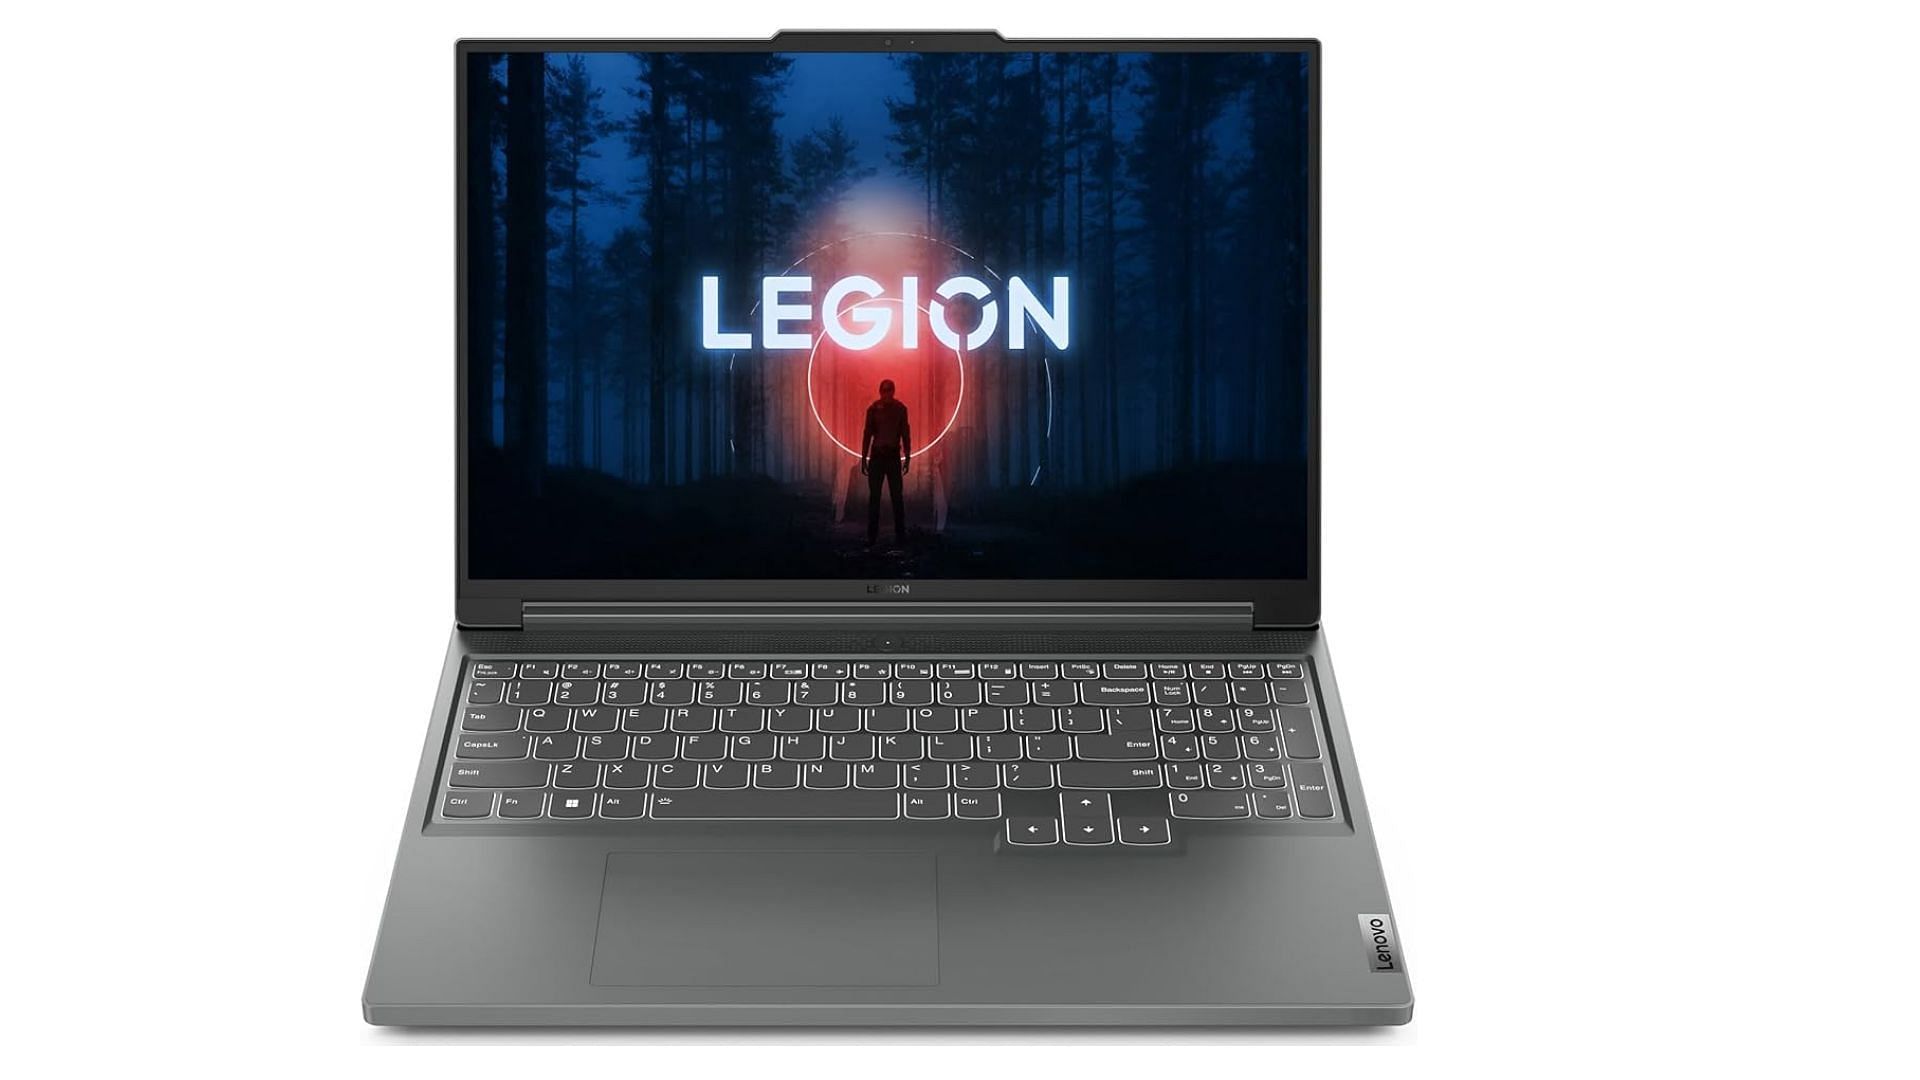 One of the best Ryzen 7 laptops for gaming enthusiasts (Image via Amazon/Lenovo)